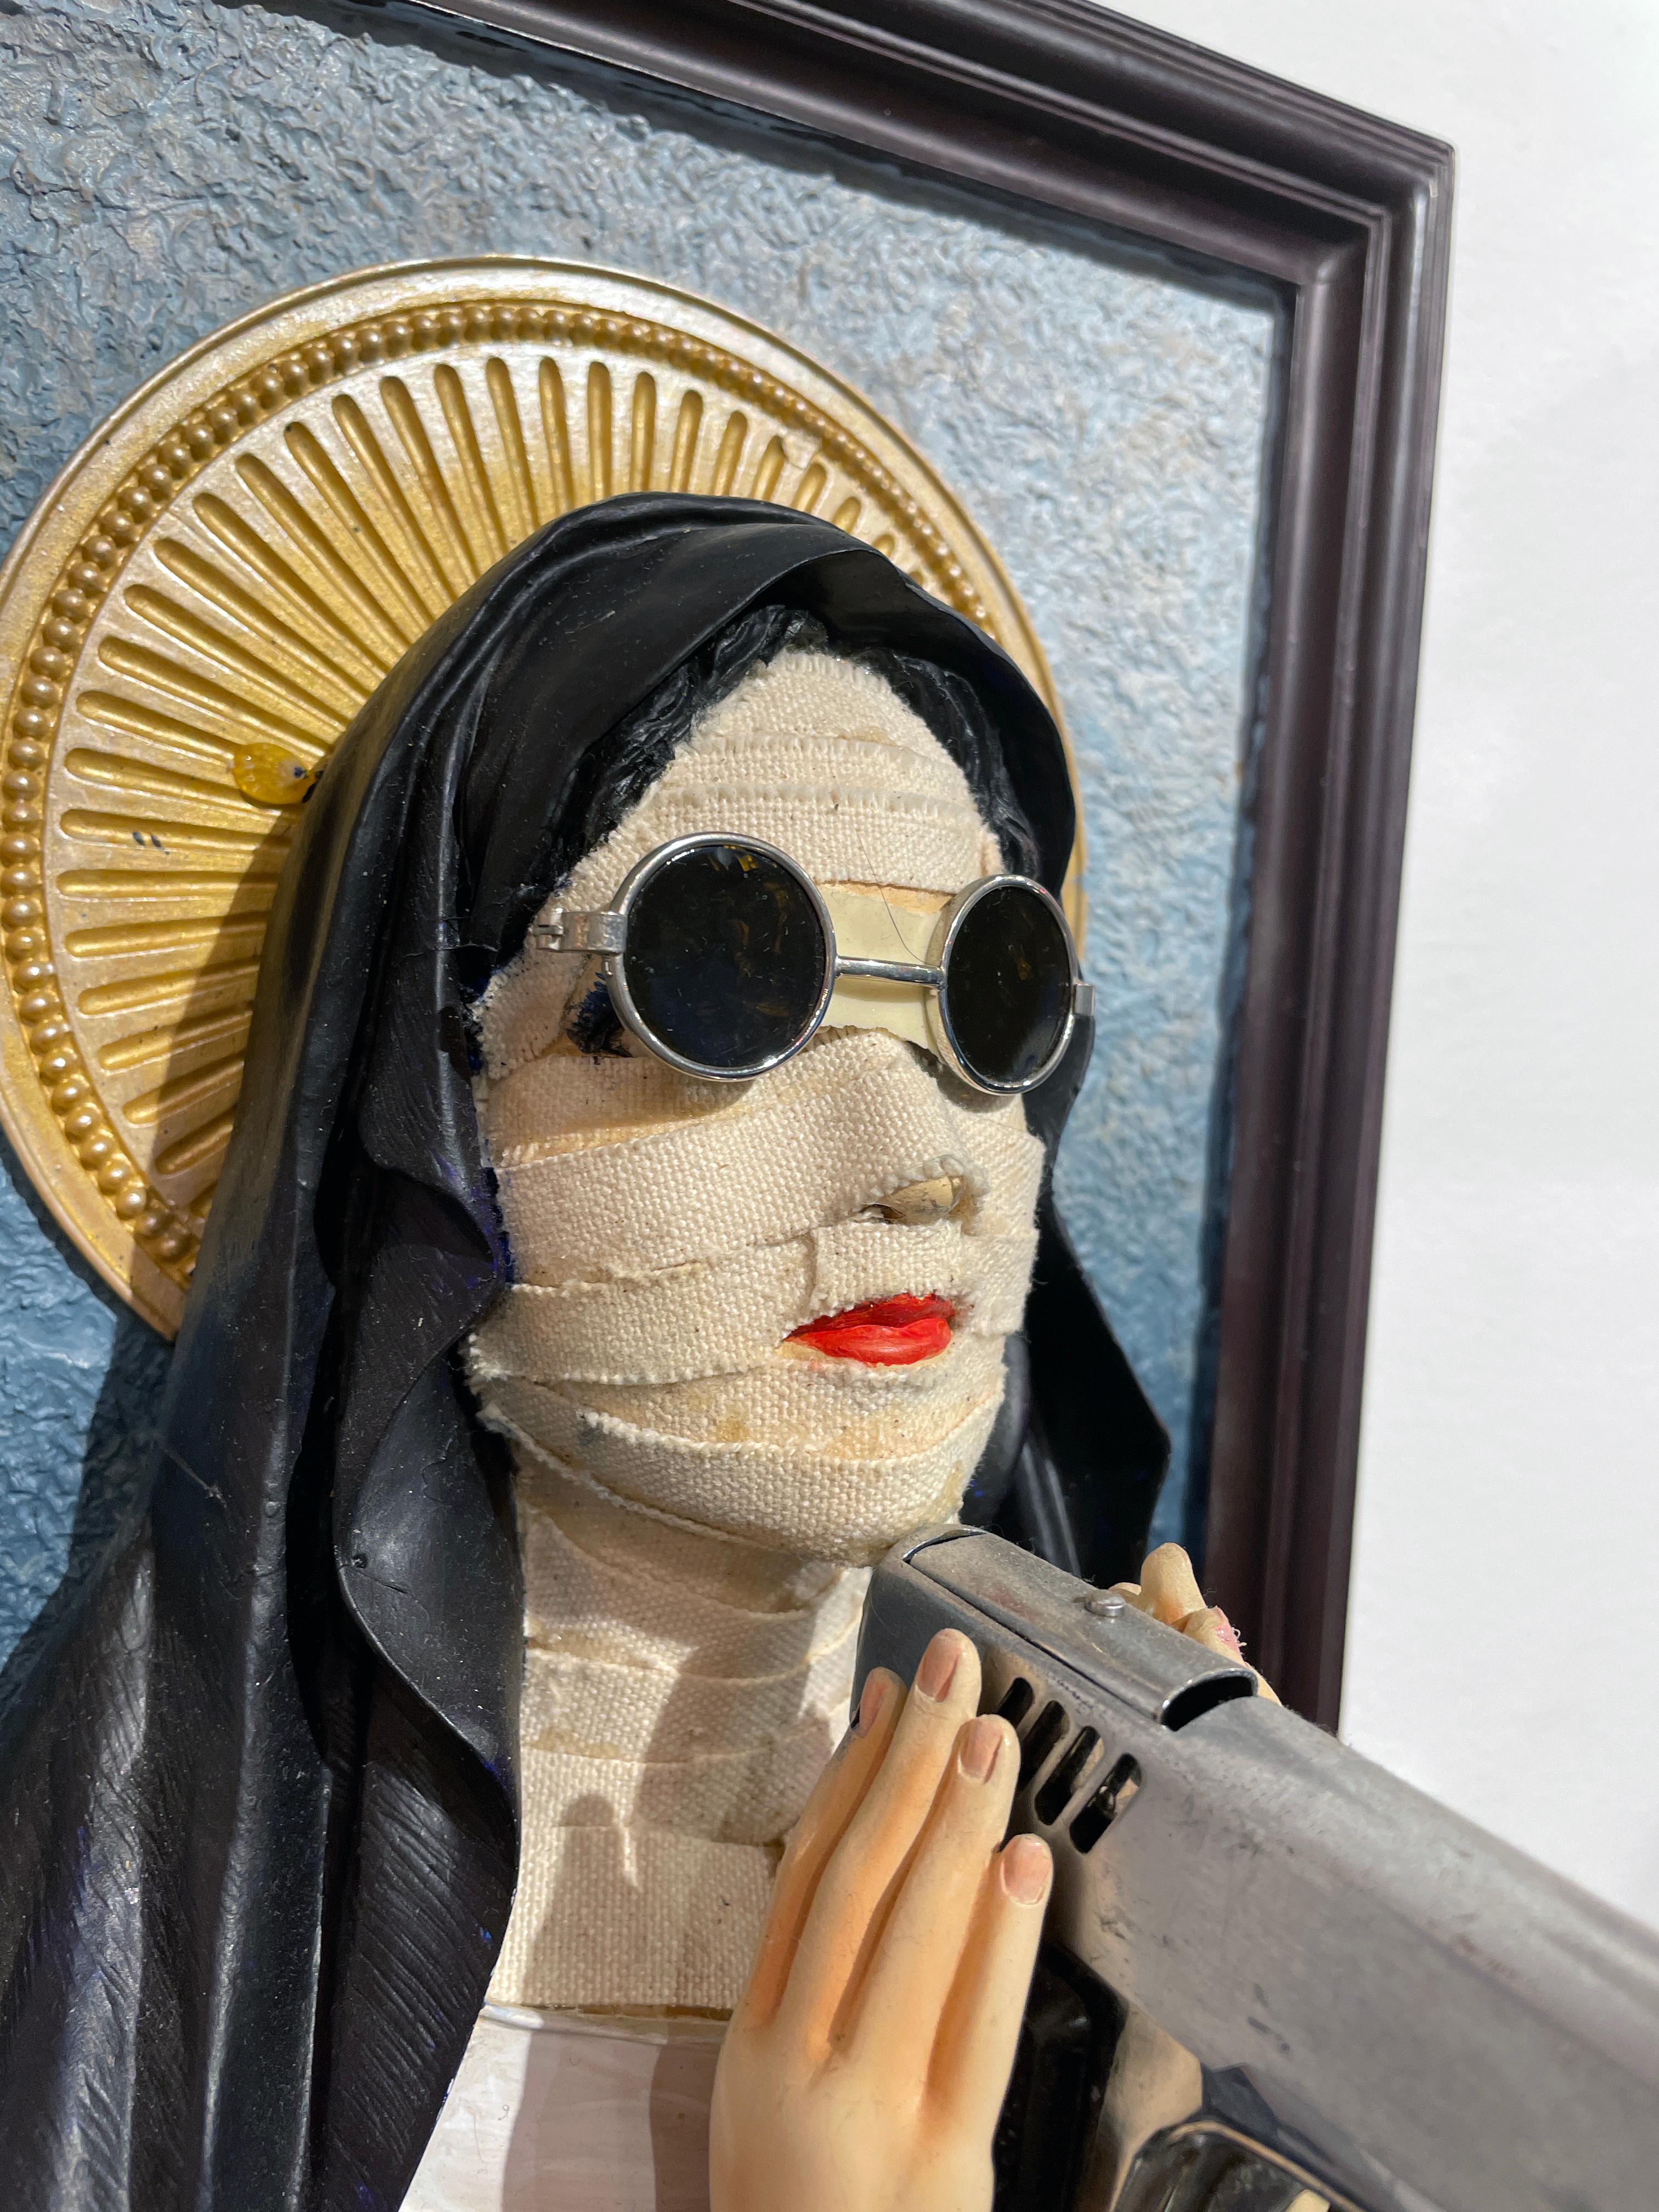 A found devotional sculpture of a woman in a habit becomes a caustic metaphor about the state of contemporary culture with a nun clasping a gun between her praying hands, sun glasses cover her eyes and her entire face shrowded in bandages.  Such is